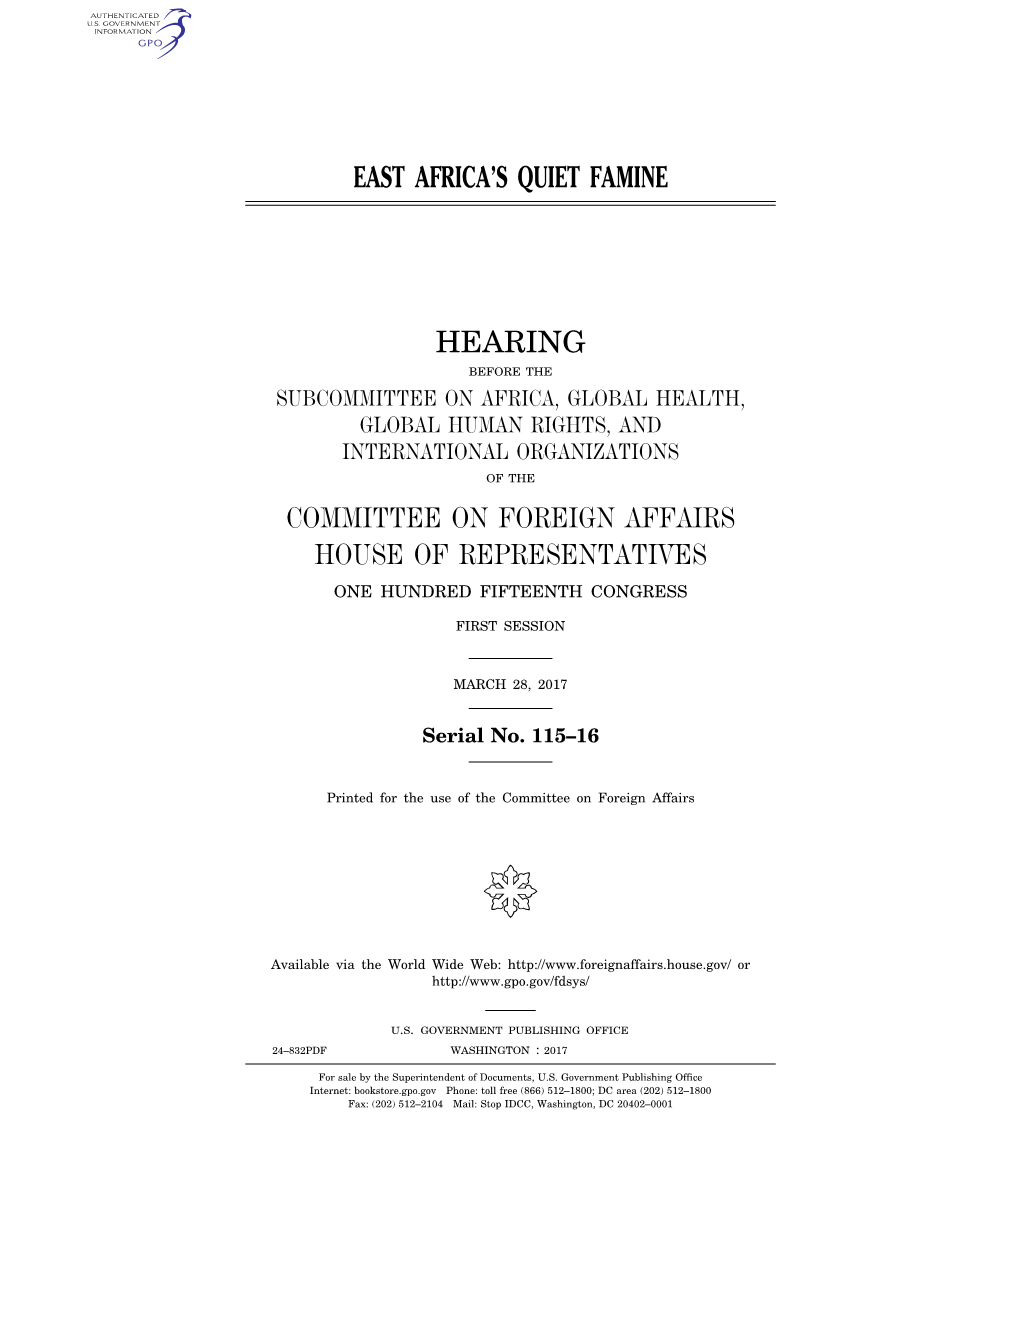 East Africa's Quiet Famine Hearing Committee On